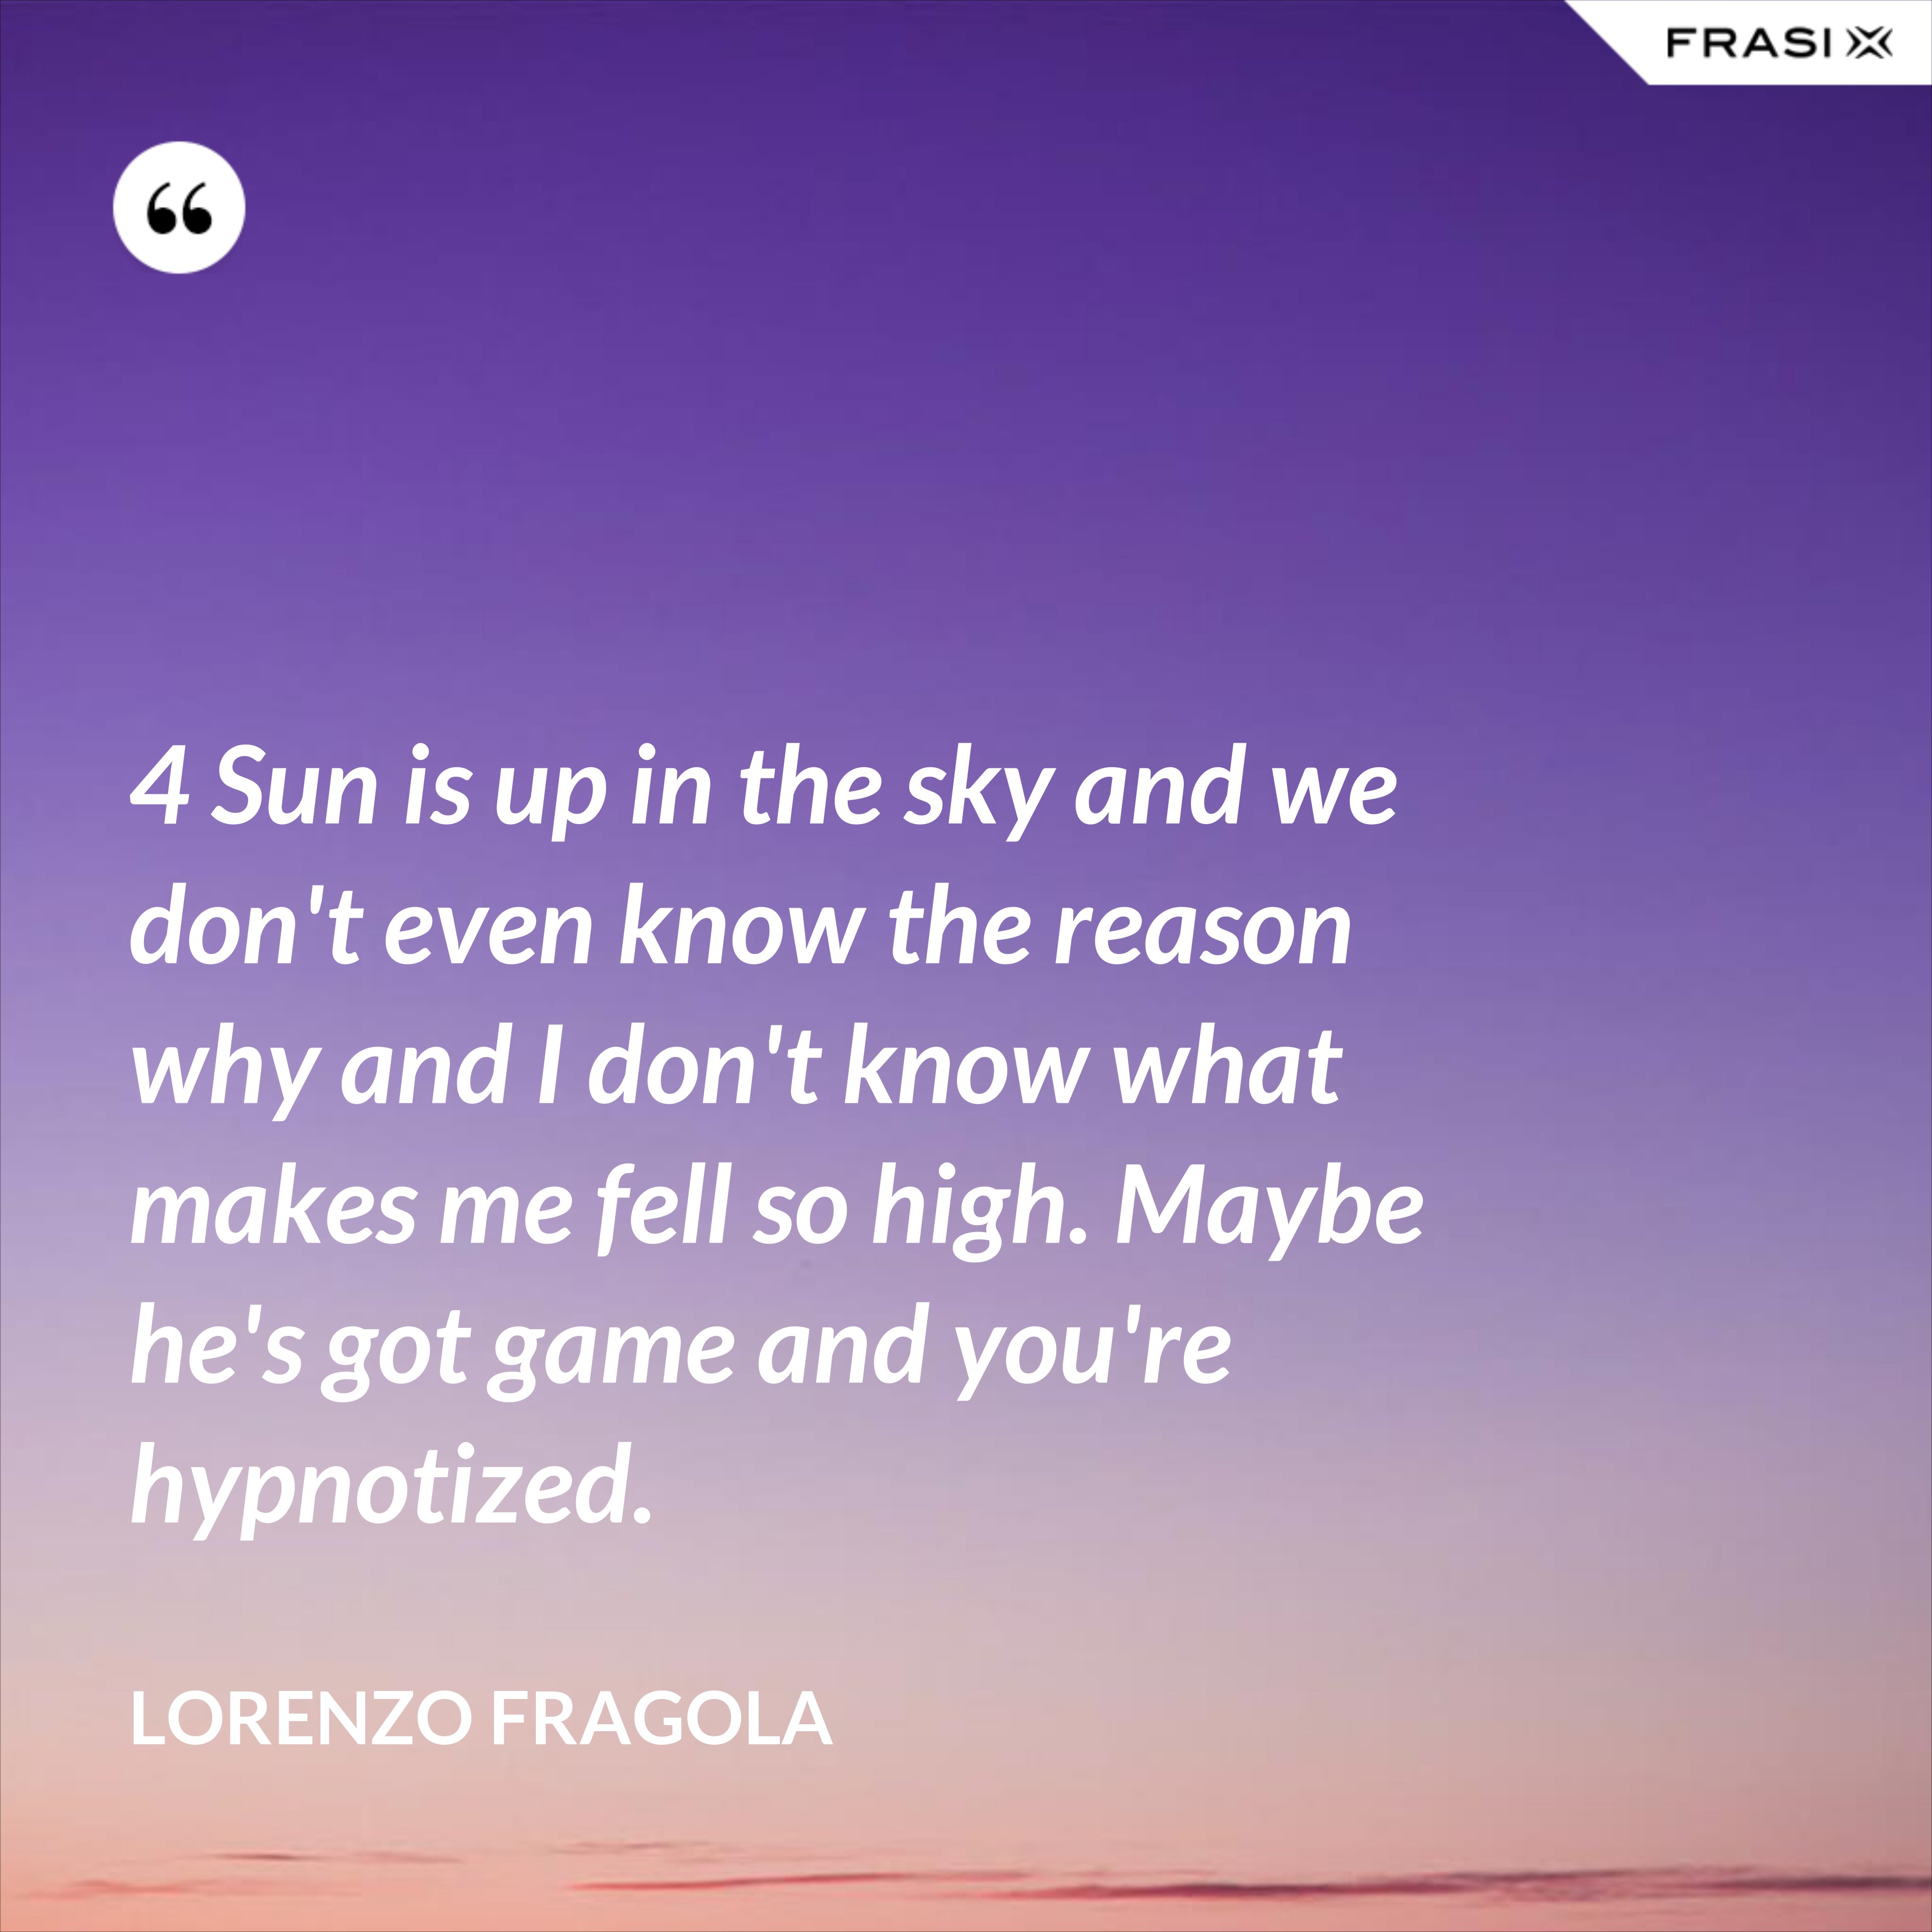 4 Sun is up in the sky and we don't even know the reason why and I don't know what makes me fell so high. Maybe he's got game and you're hypnotized. - Lorenzo Fragola